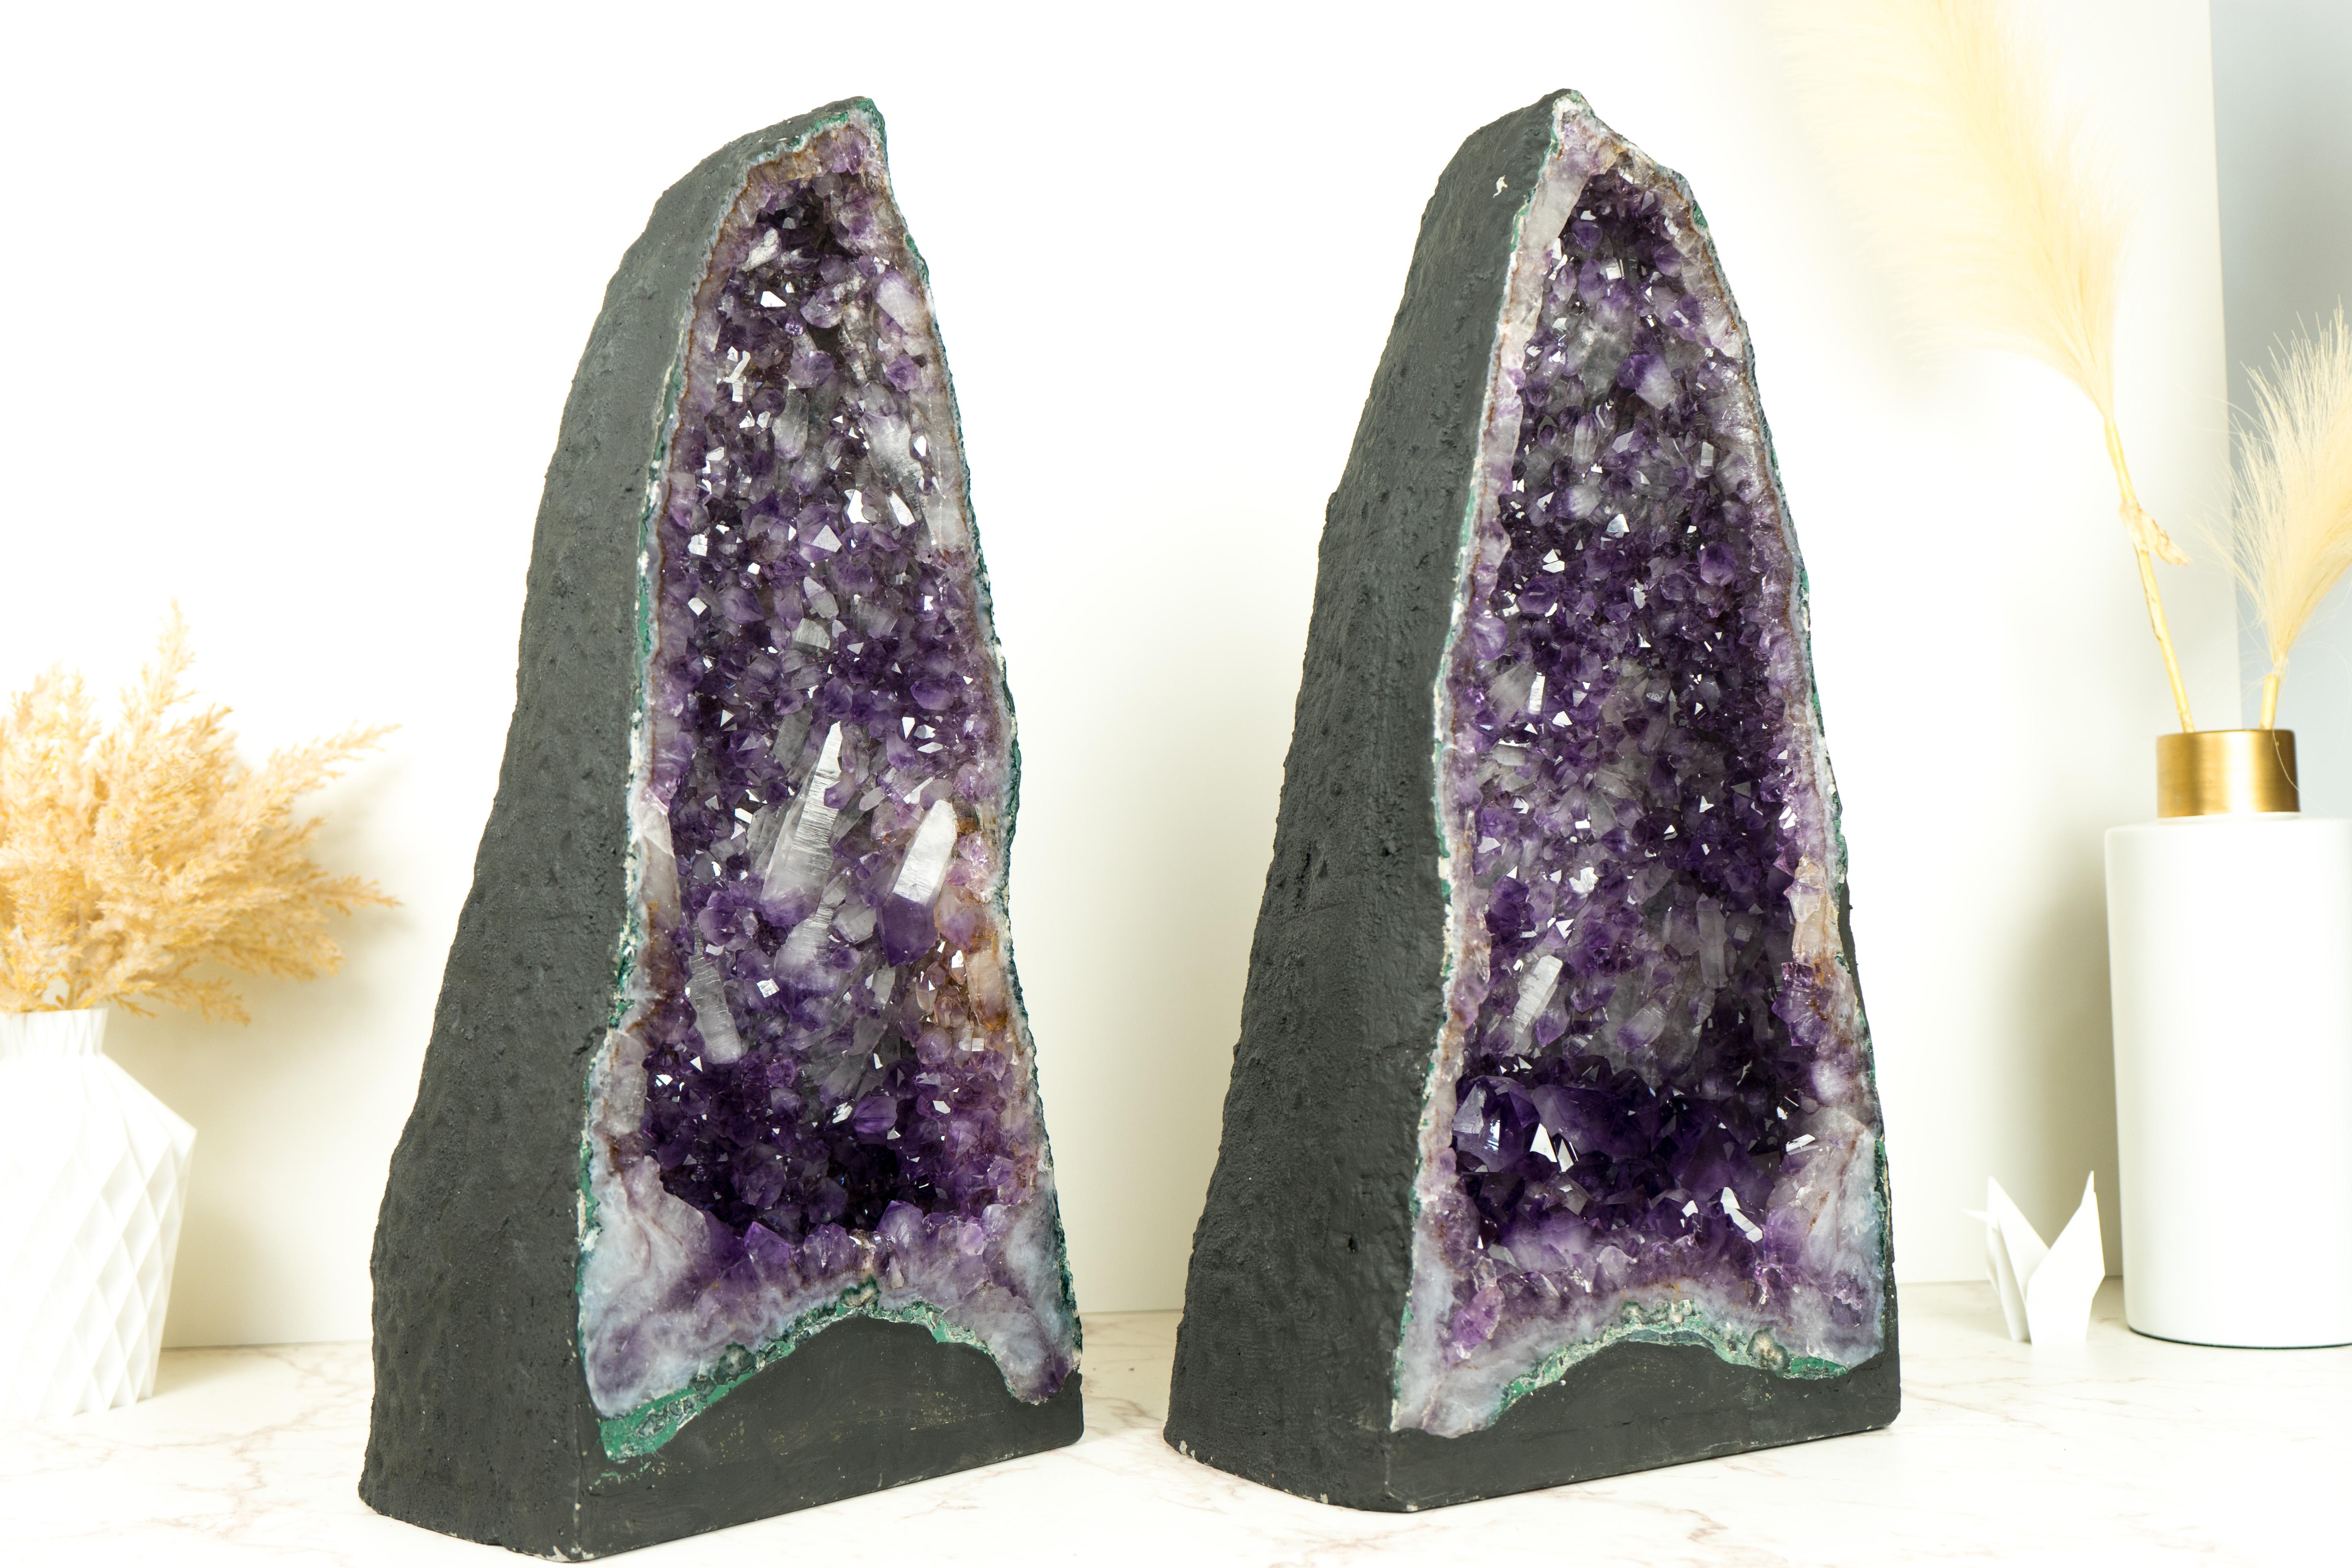 Pair of Tall Deep Purple Amethyst Crystal Geode Cathedrals, with Rare Druzy For Sale 3